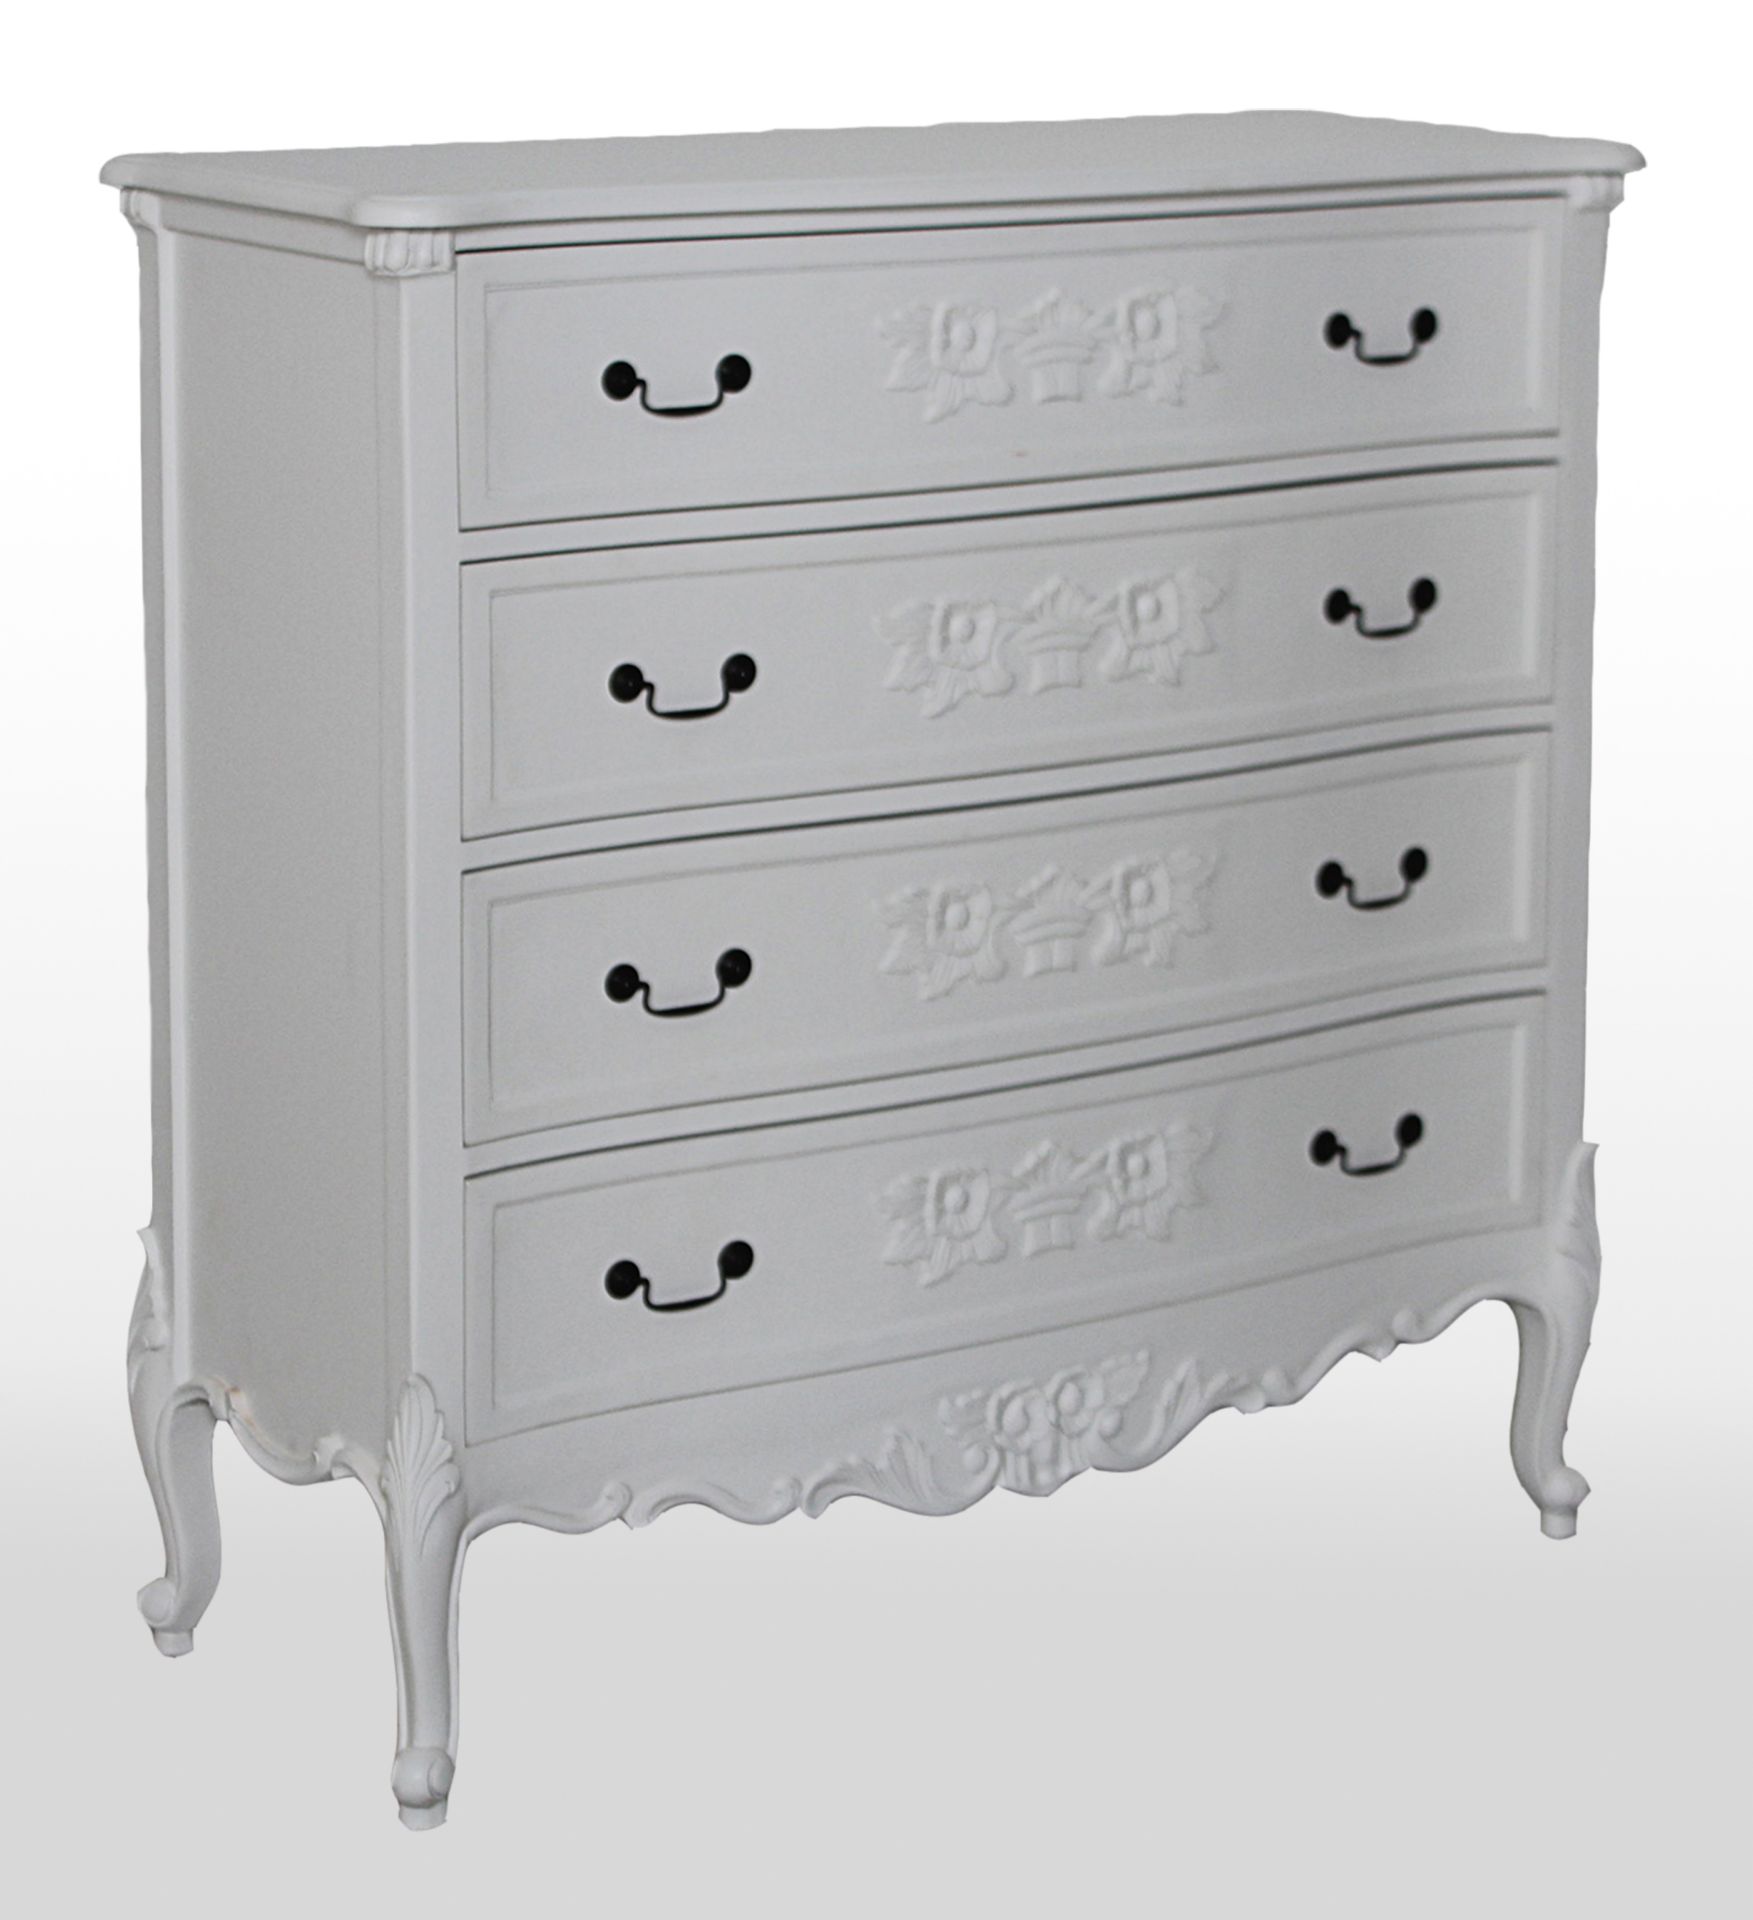 NEW PACKAGED BOUTIQUE HIGH QUALITY SOLID MAHOGANY LOUIS FRENCH 4 DRAWER CHEST IN WHITE